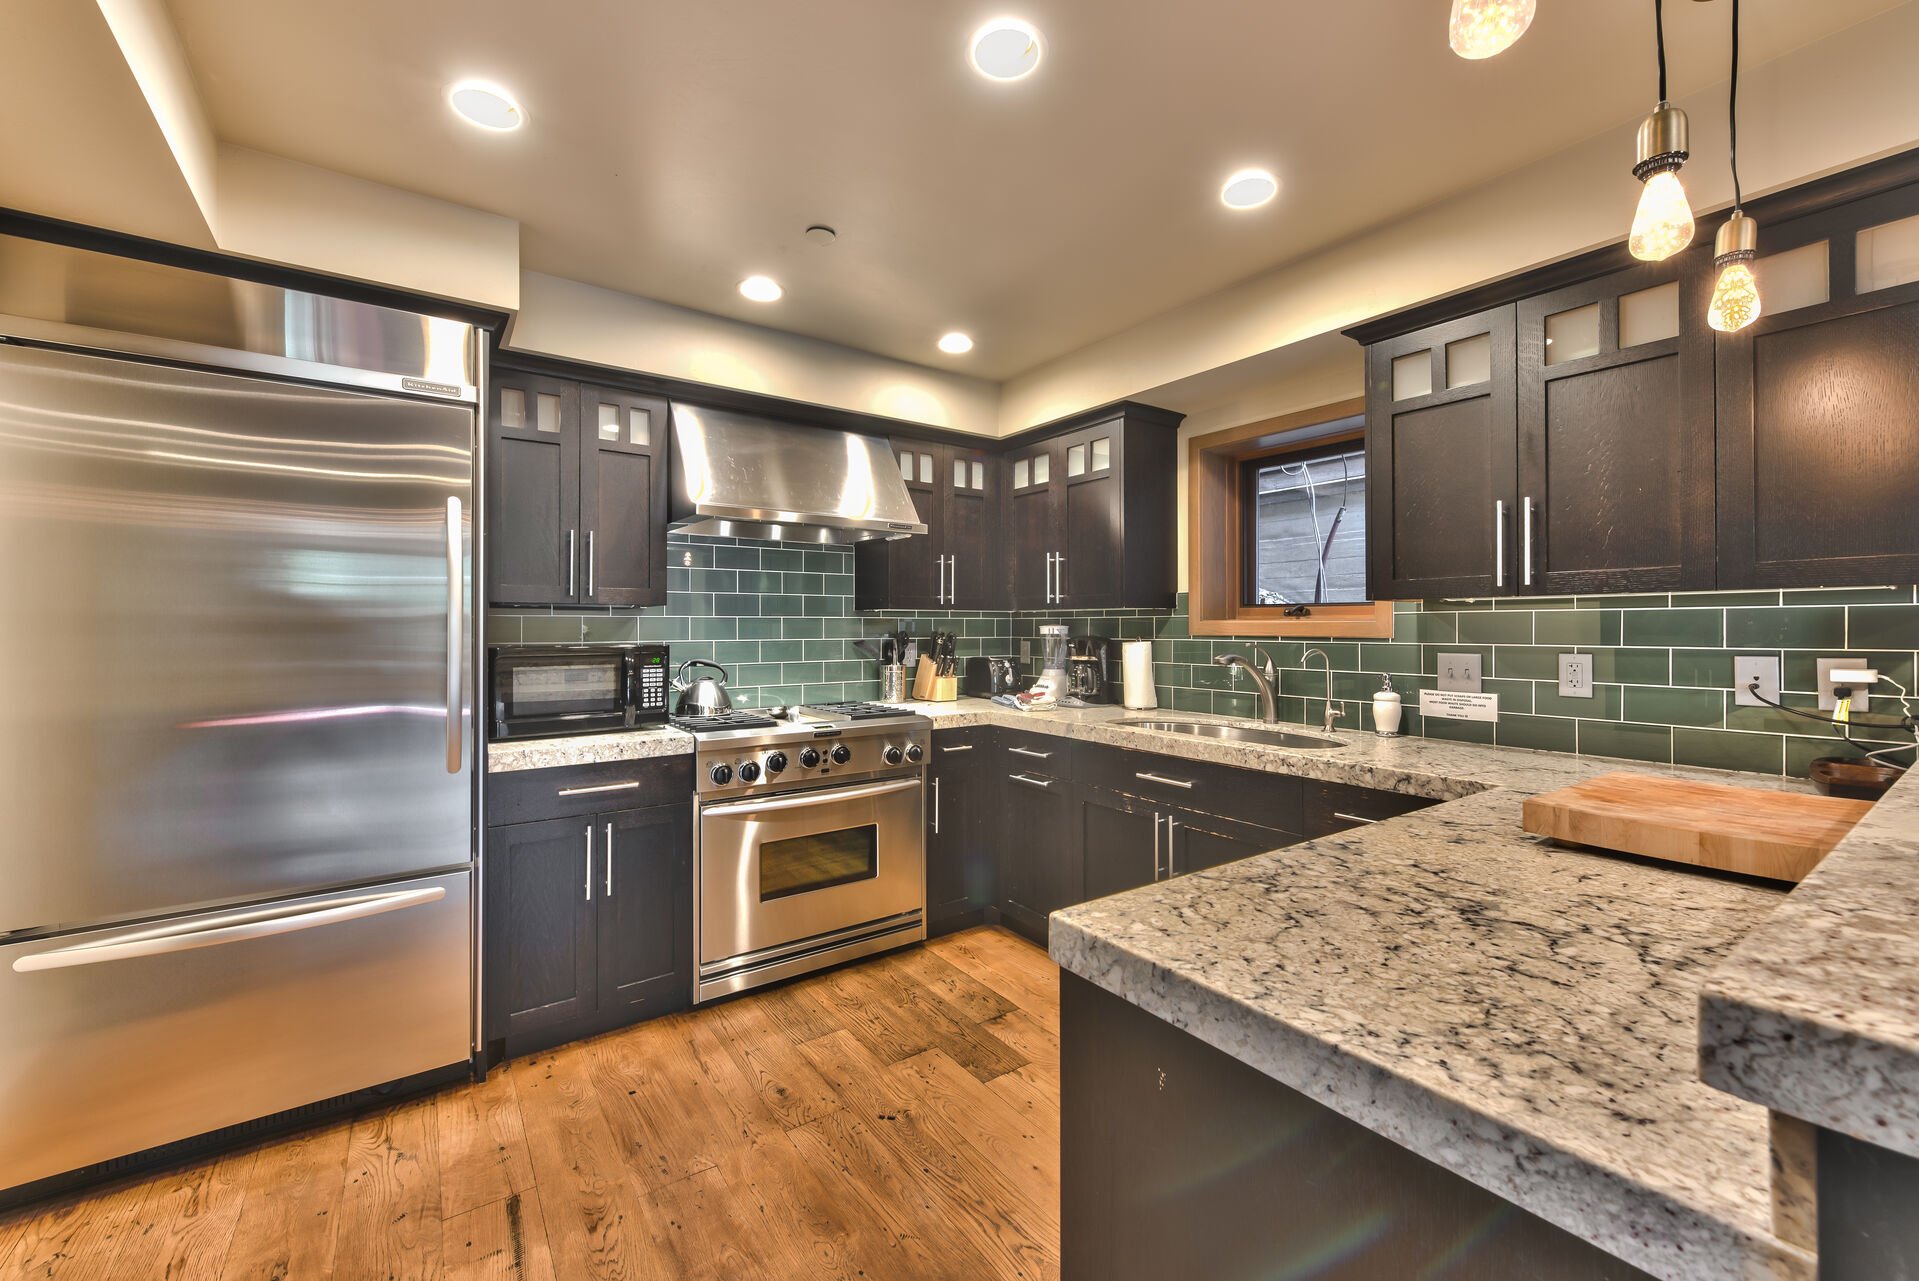 Fully Equipped Kitchen with Stainless Steel Appliances, High-end Touches and Hardwood Floors with Radiant Heat